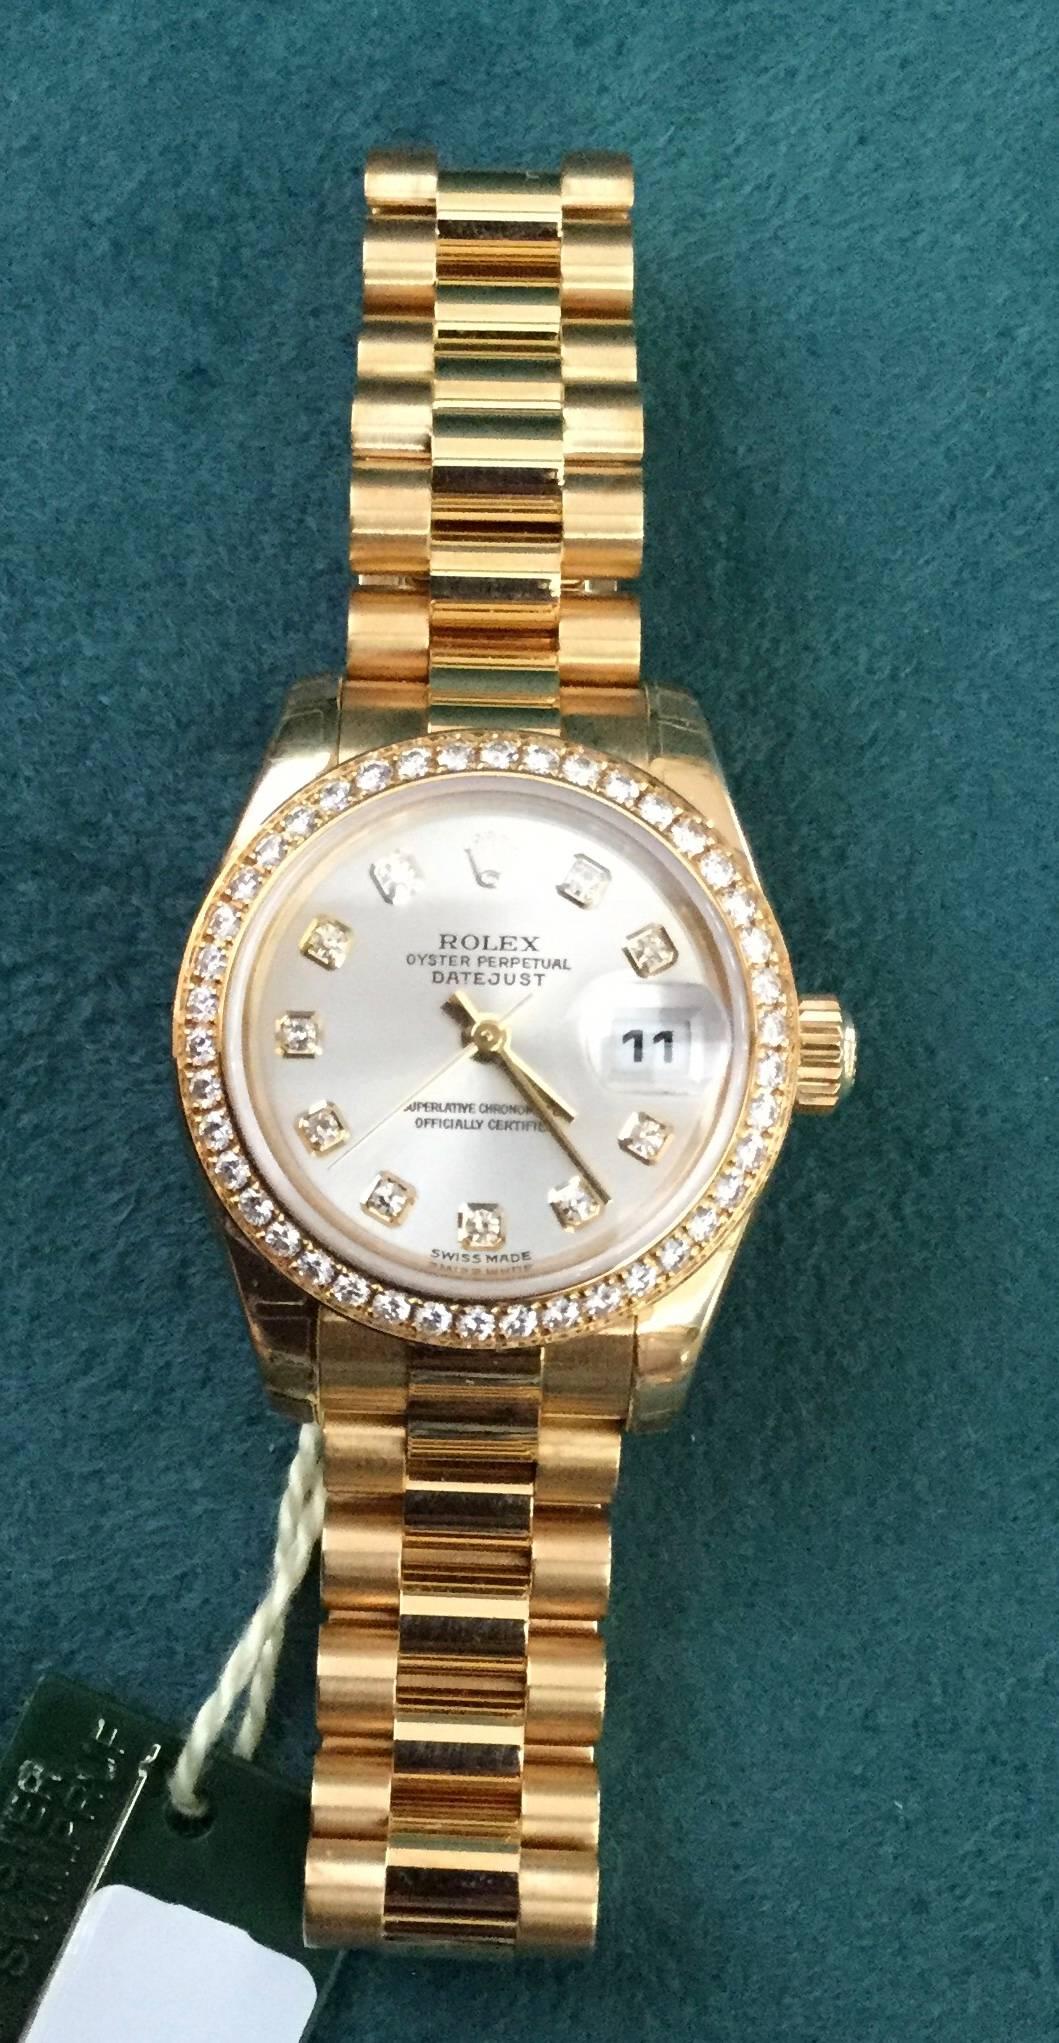 Lady's 18K Rolex Oyster Perpetual Datejust with silvered diamond dial, diamond bezel and President bracelet. NEW. Comes with original Rolex warranty and original box.